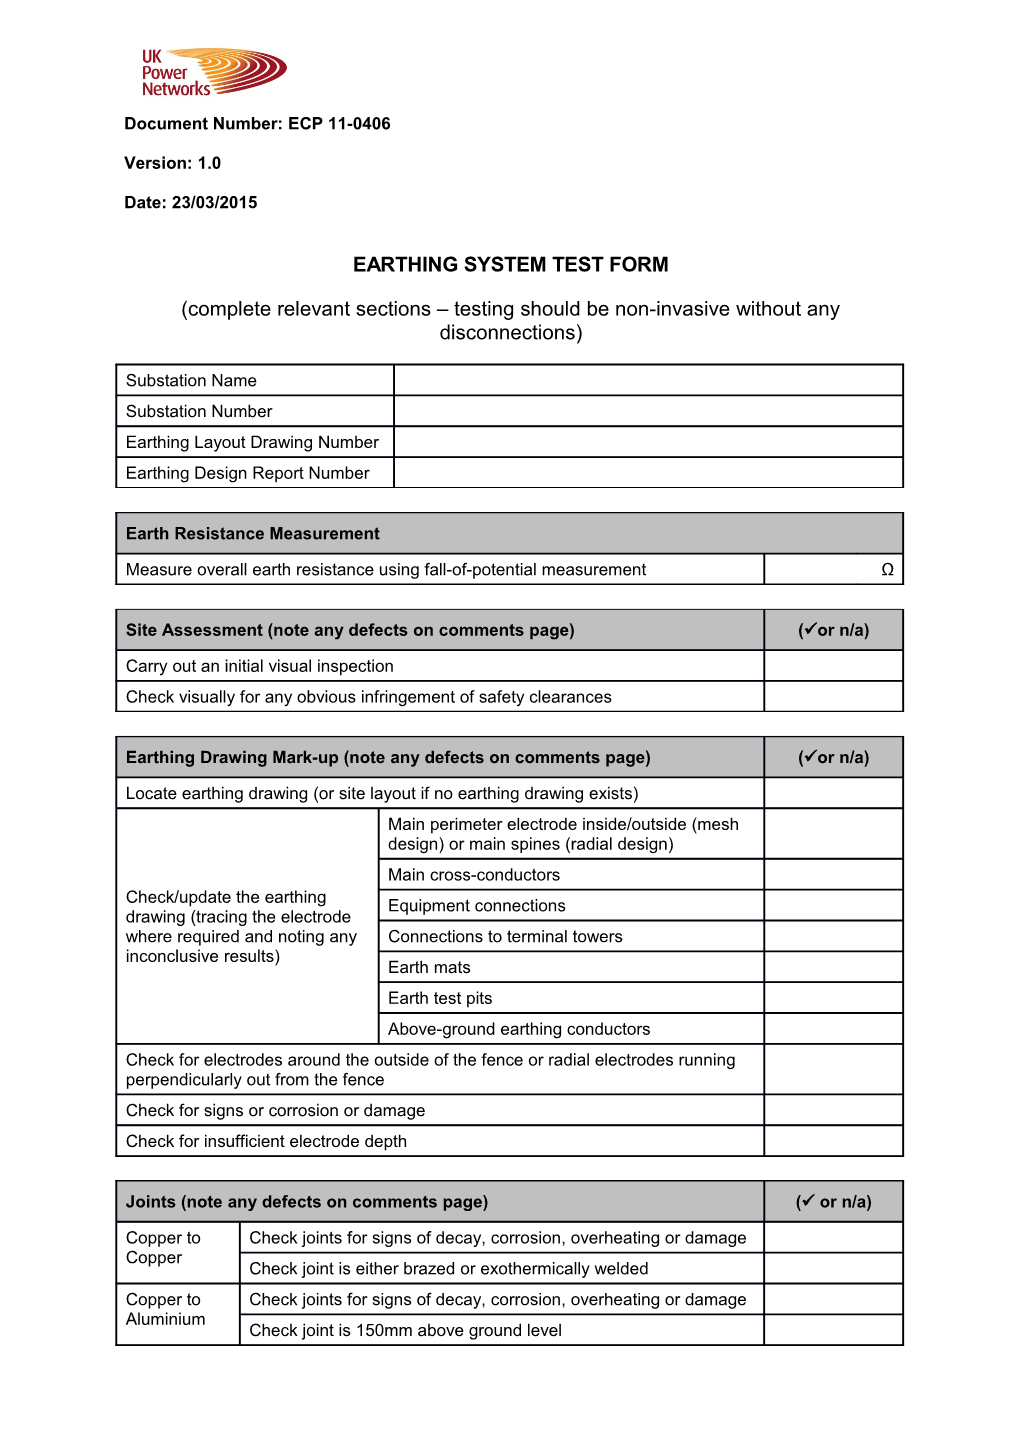 ECP 11-0406 Earthing System Test Form